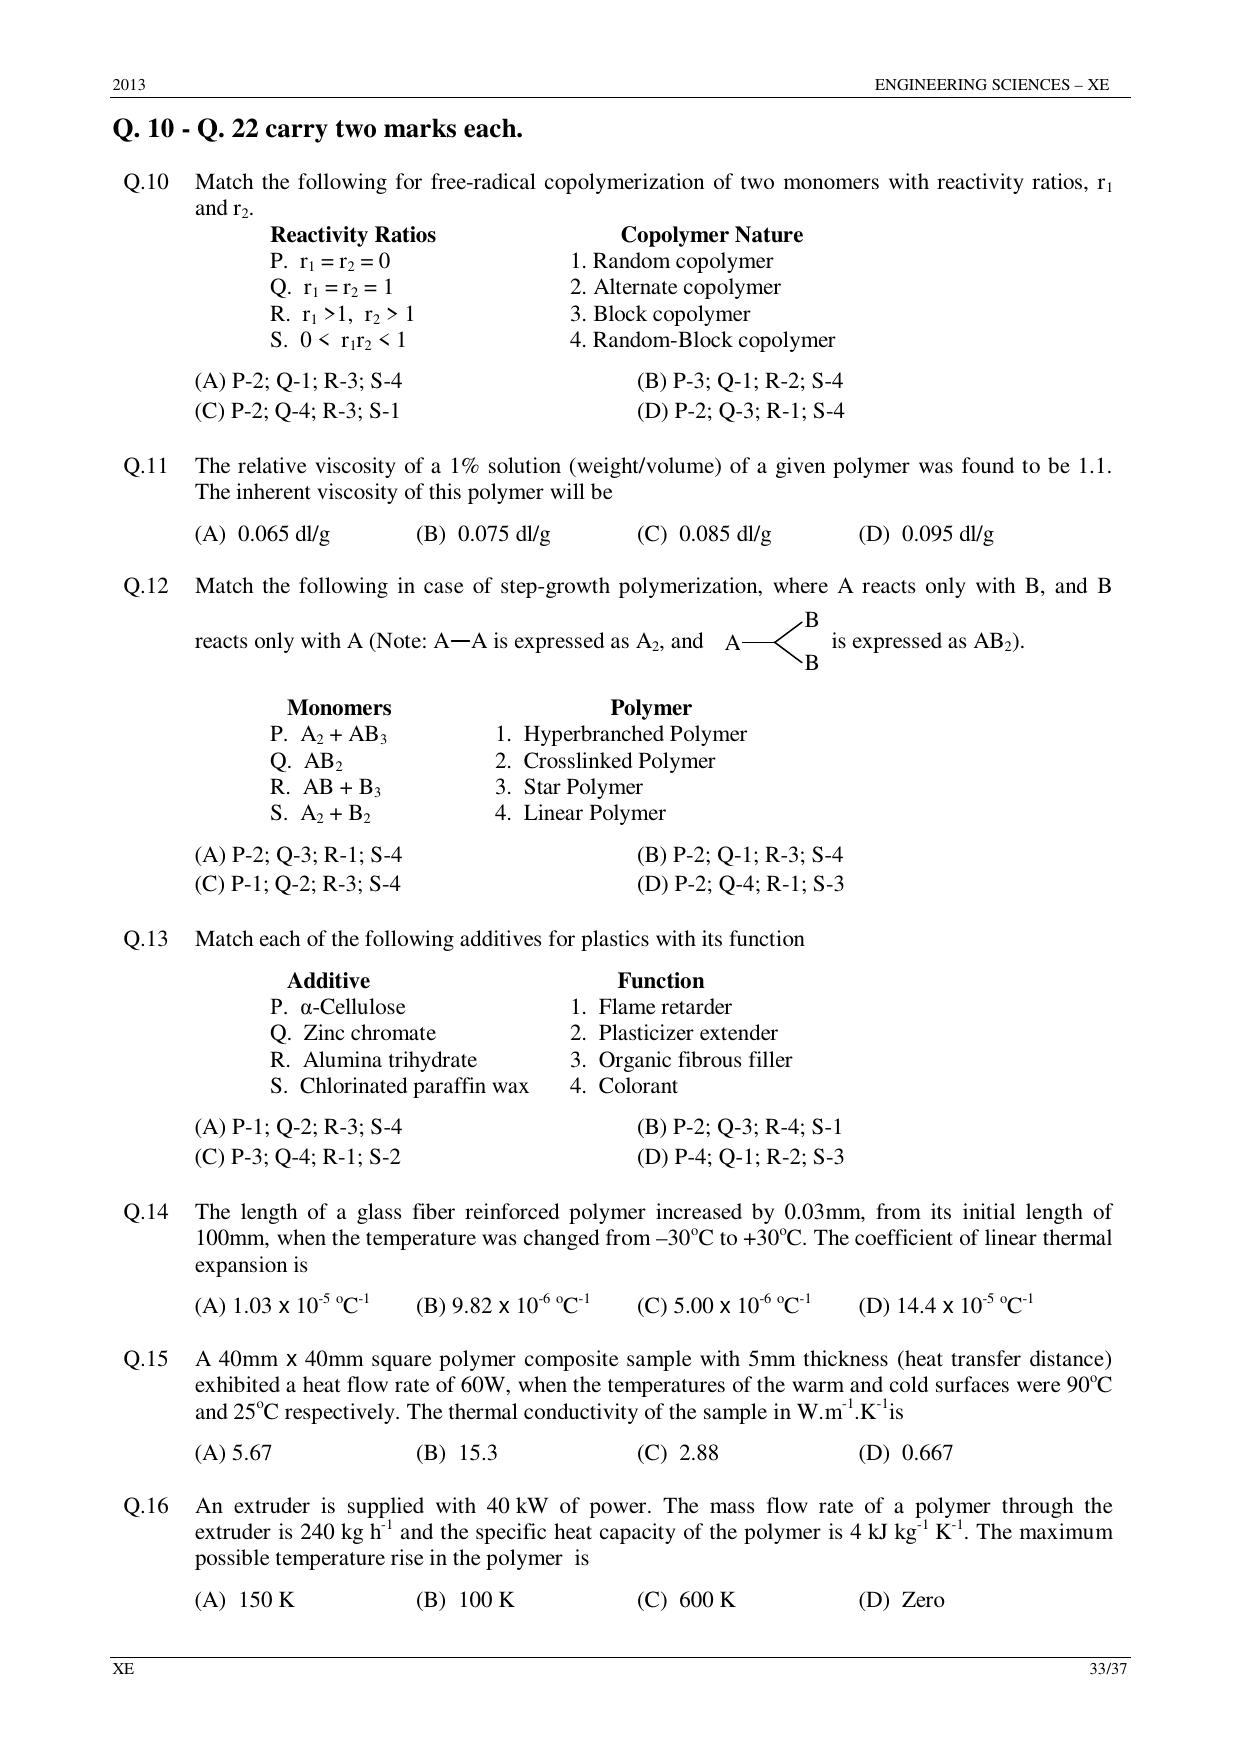 GATE 2013 Engineering Sciences (XE) Question Paper with Answer Key - Page 33